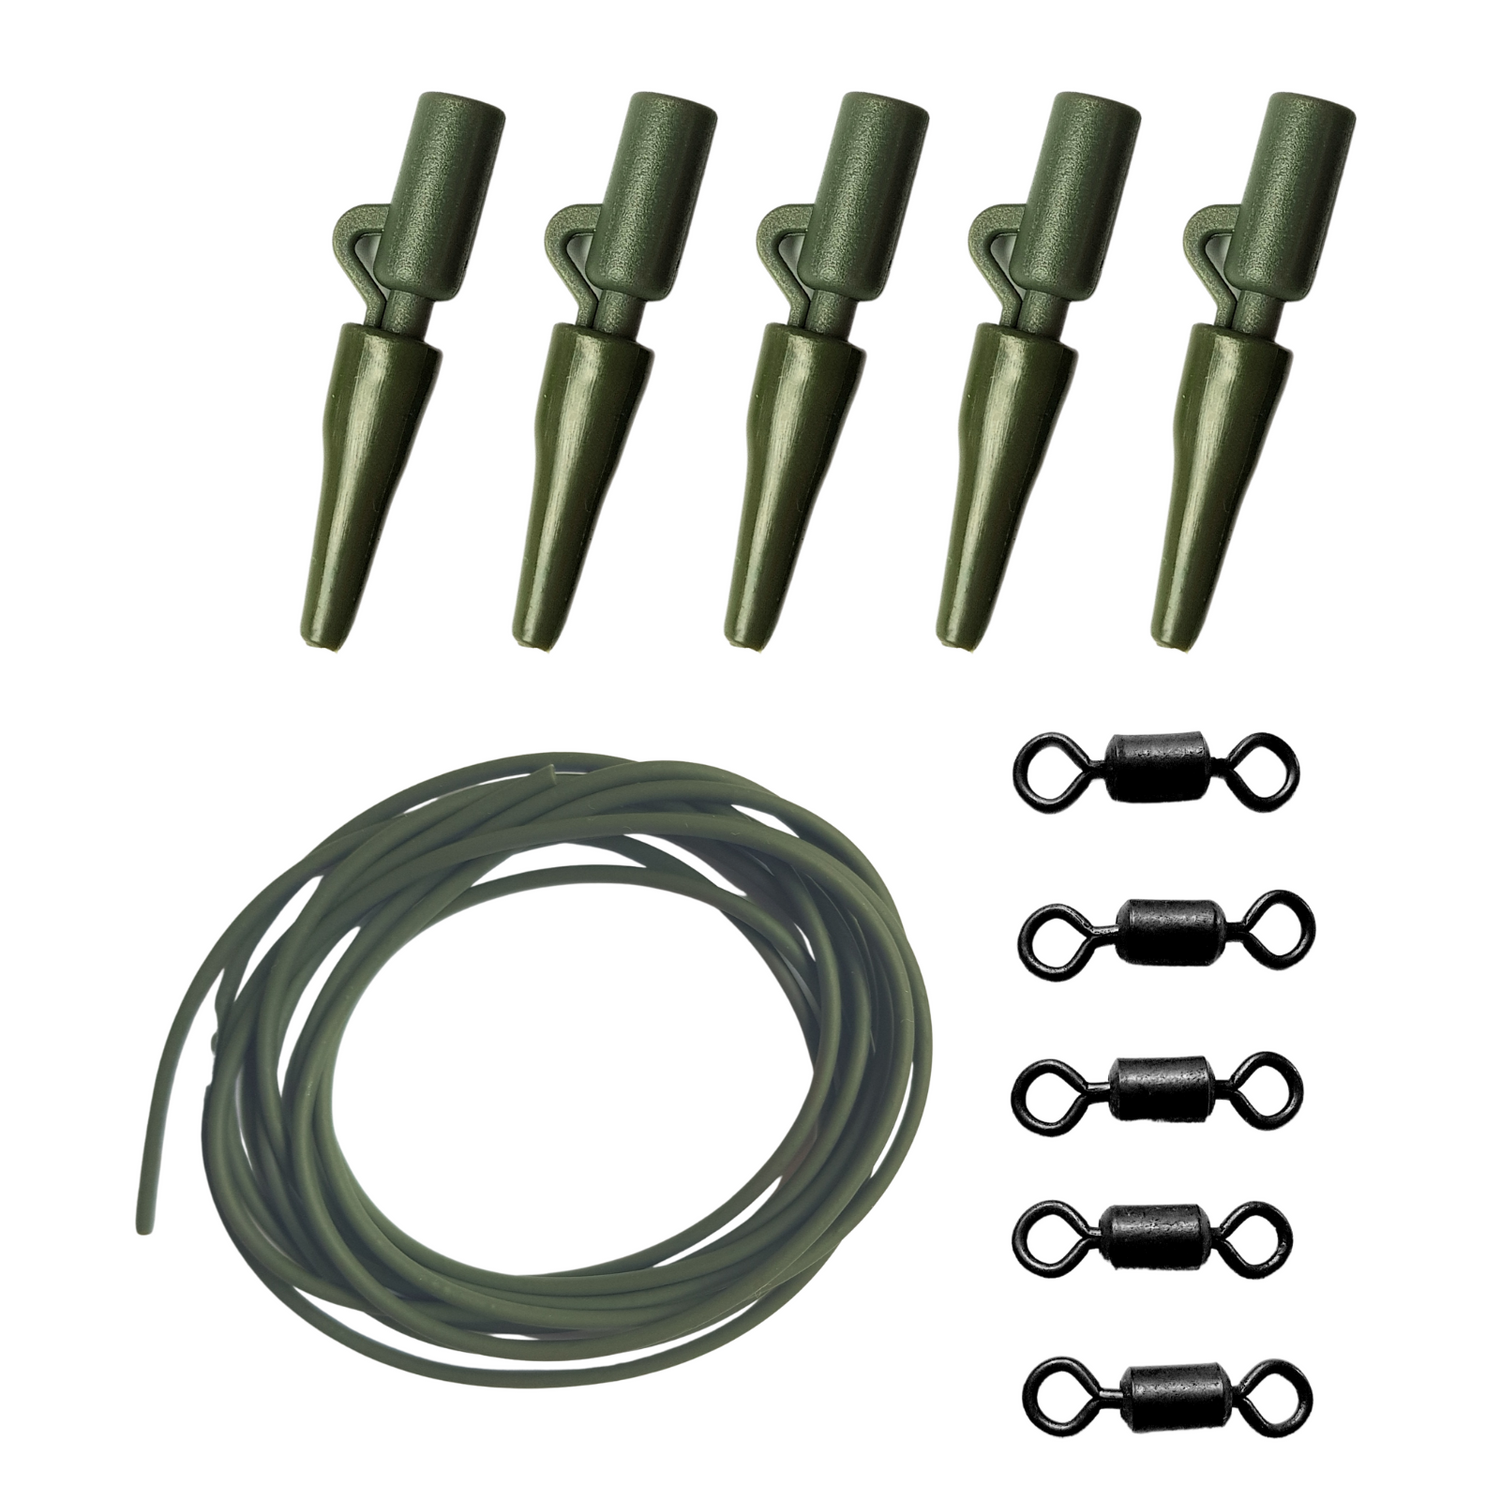 41 Piece Fishing Green Lead Clip Action Pack Inc Clips, Swivels, Tail Rubbers 6mm Beads & Tubing